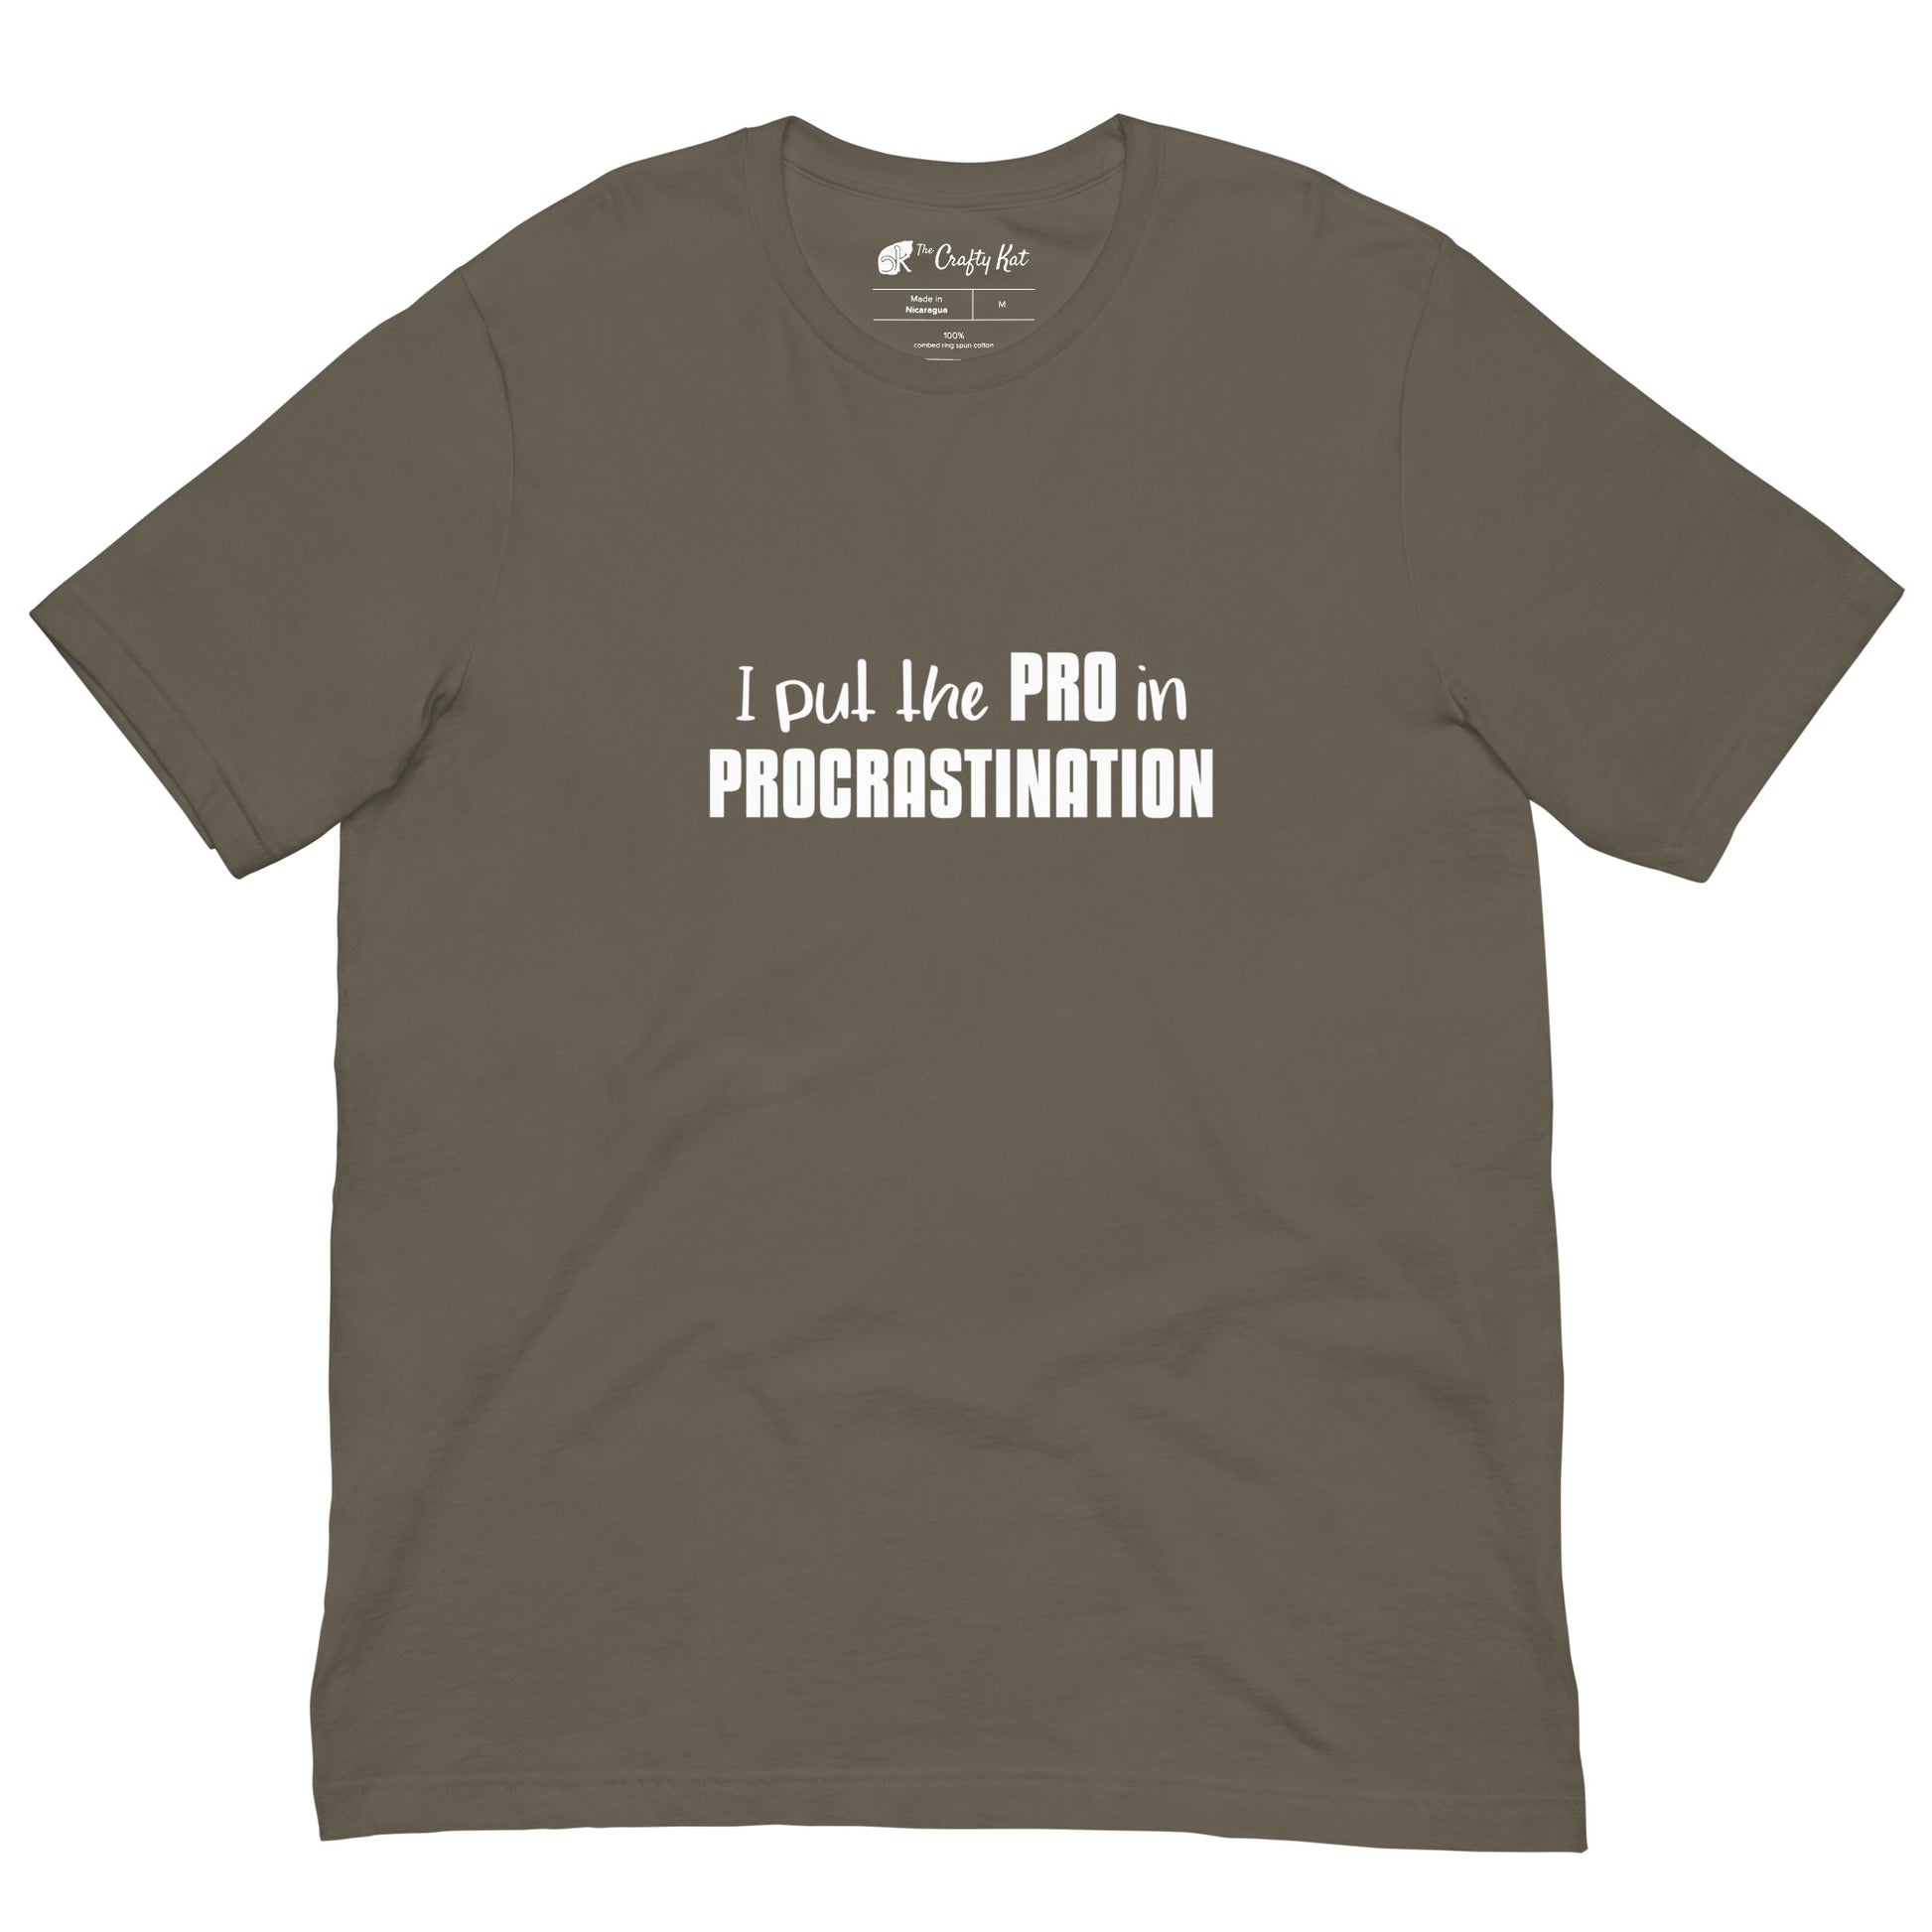 Army (olive) unisex t-shirt with text graphic: "I put the PRO in PROCRASTINATION"